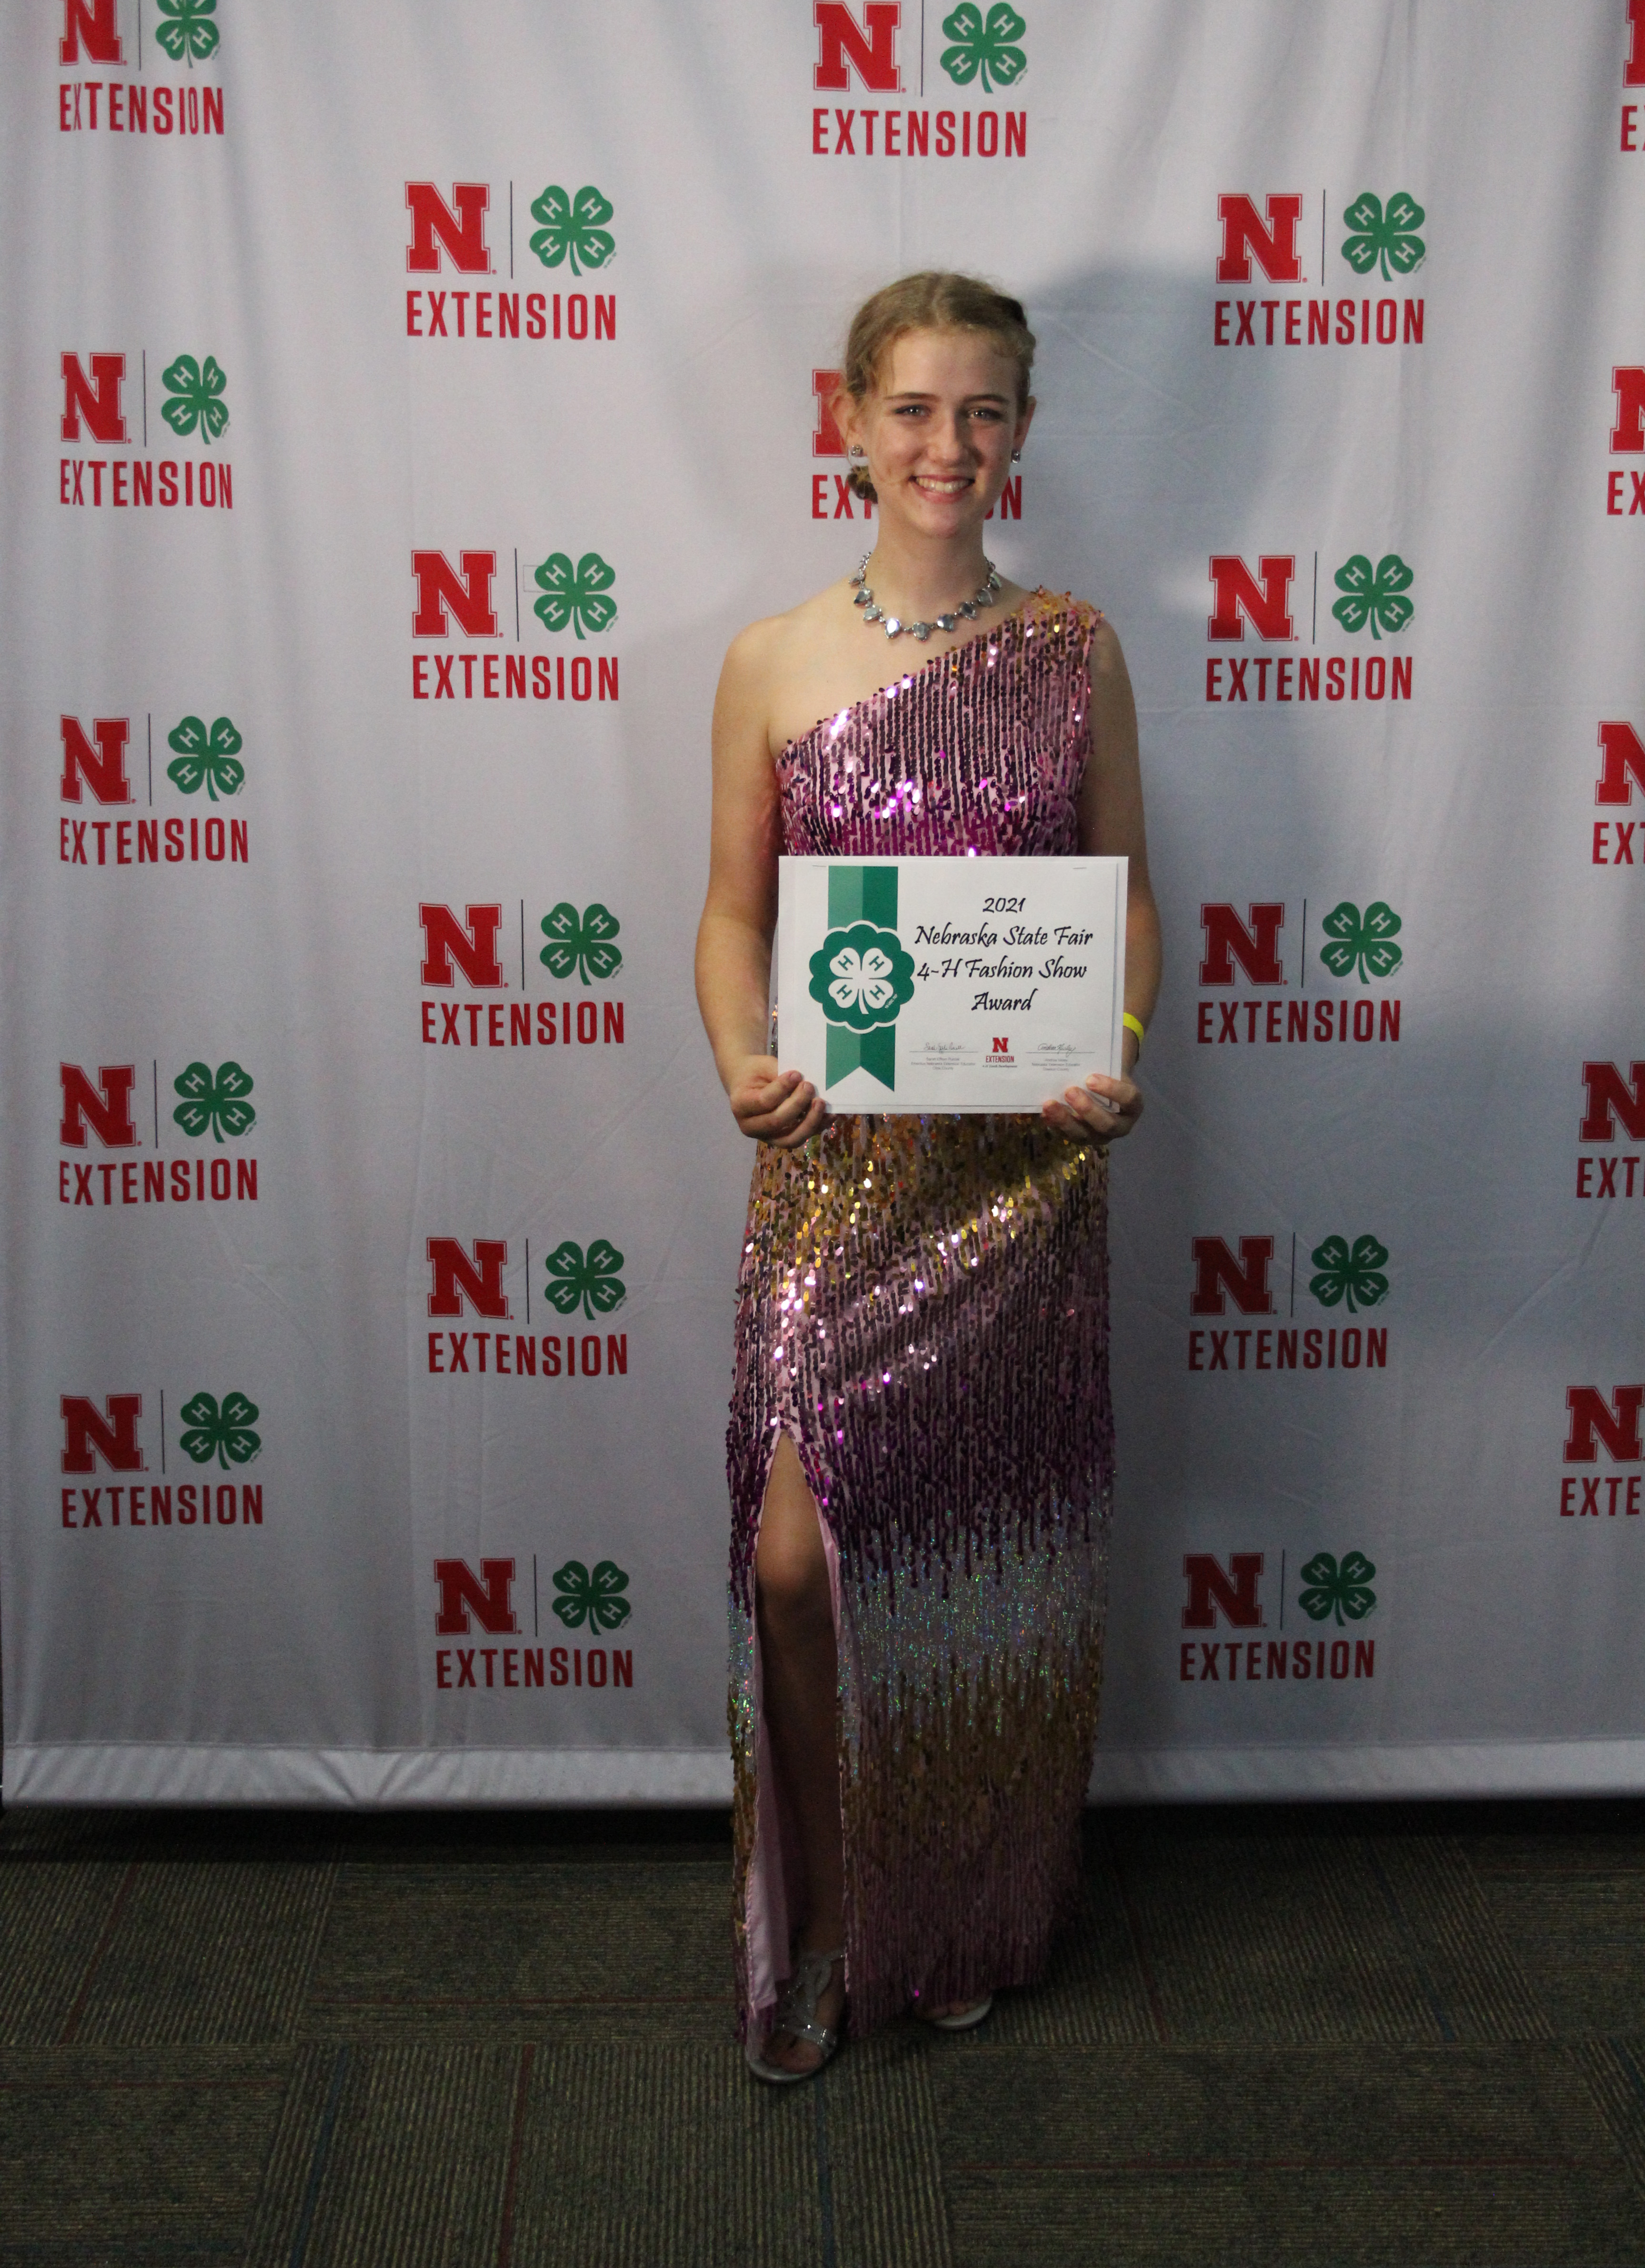 This dress modeled at the Nebraska State Fair was part of Omaha Fashion Week's Student Designer event.